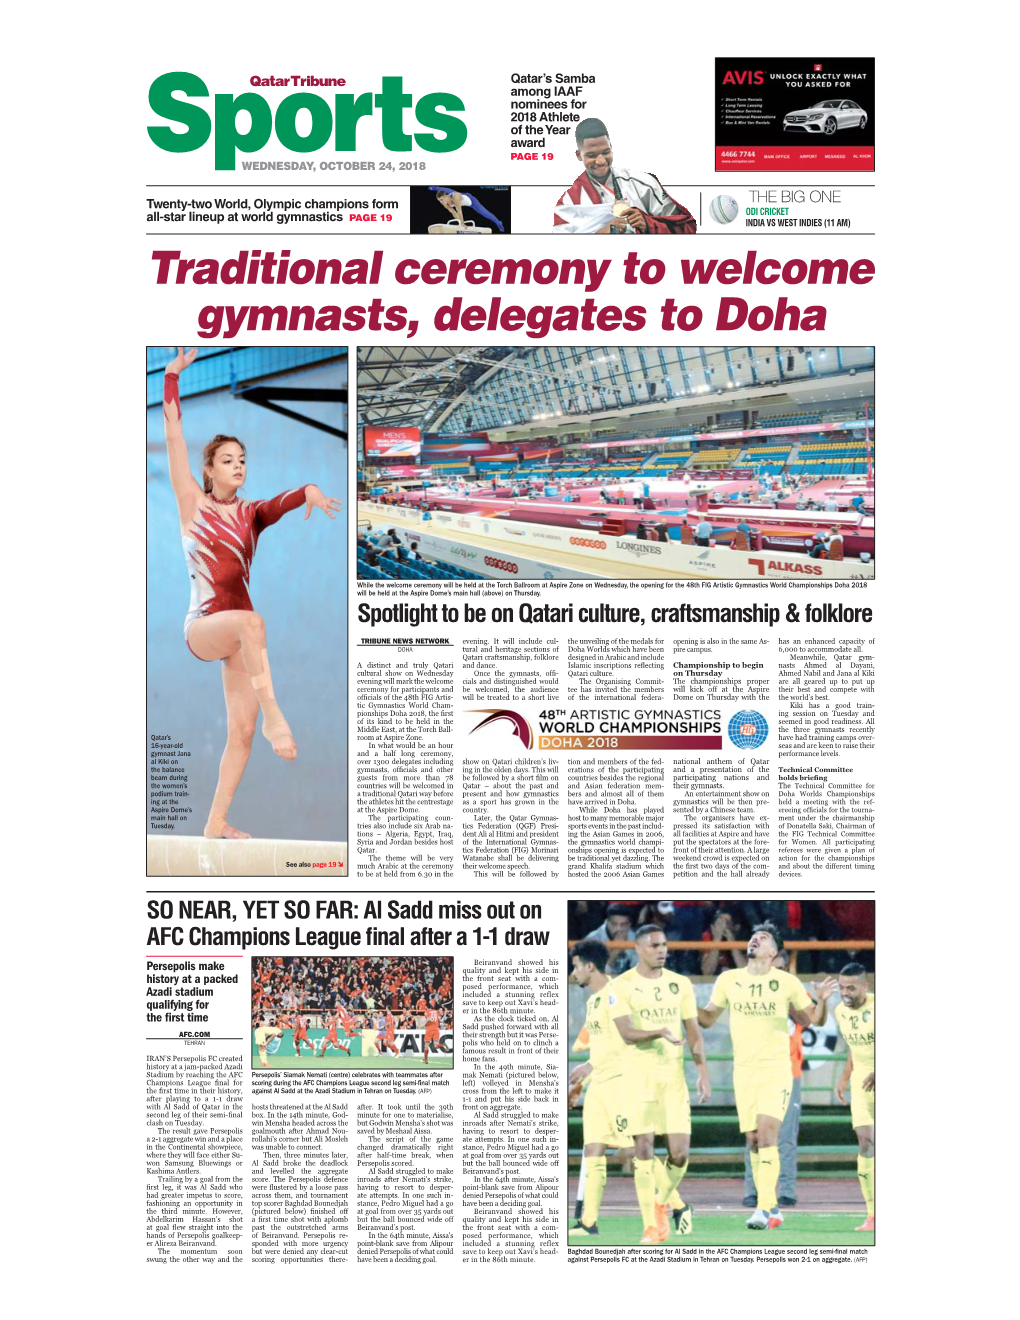 Traditional Ceremony to Welcome Gymnasts, Delegates to Doha